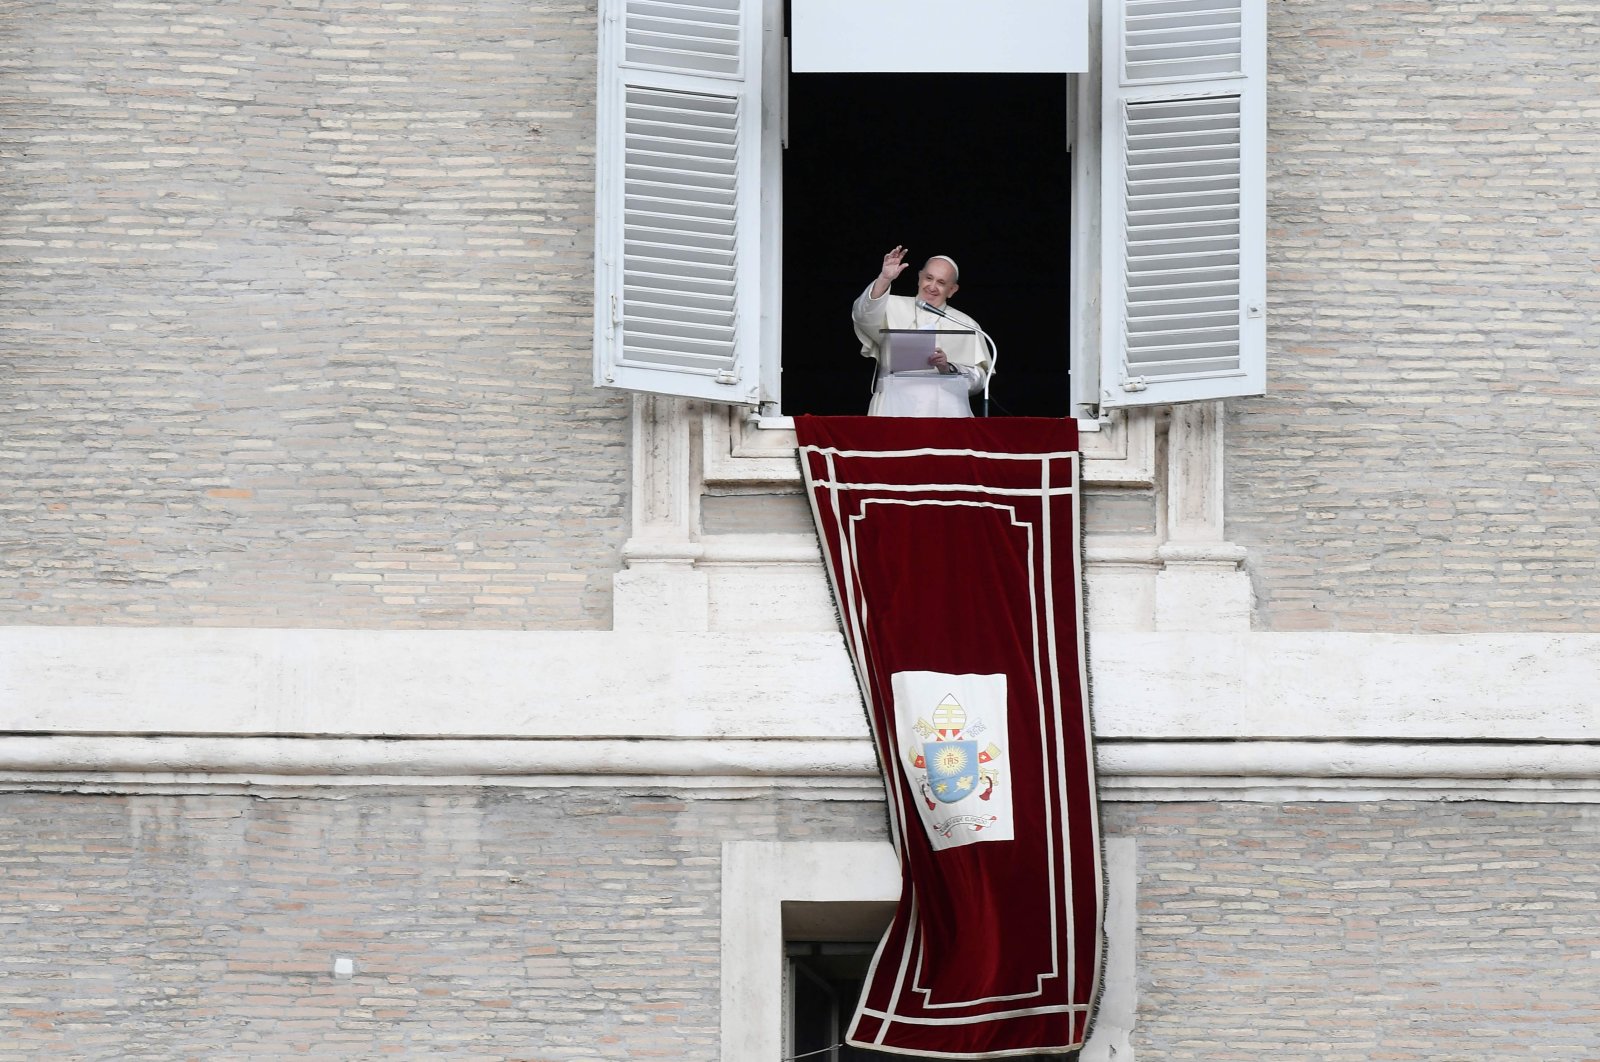 Pope Francis waves to worshippers from the window of the Apostolic palace overlooking St. Peter's Square during the weekly Angelus prayer in the Vatican, Oct. 4, 2020. (AFP Photo)